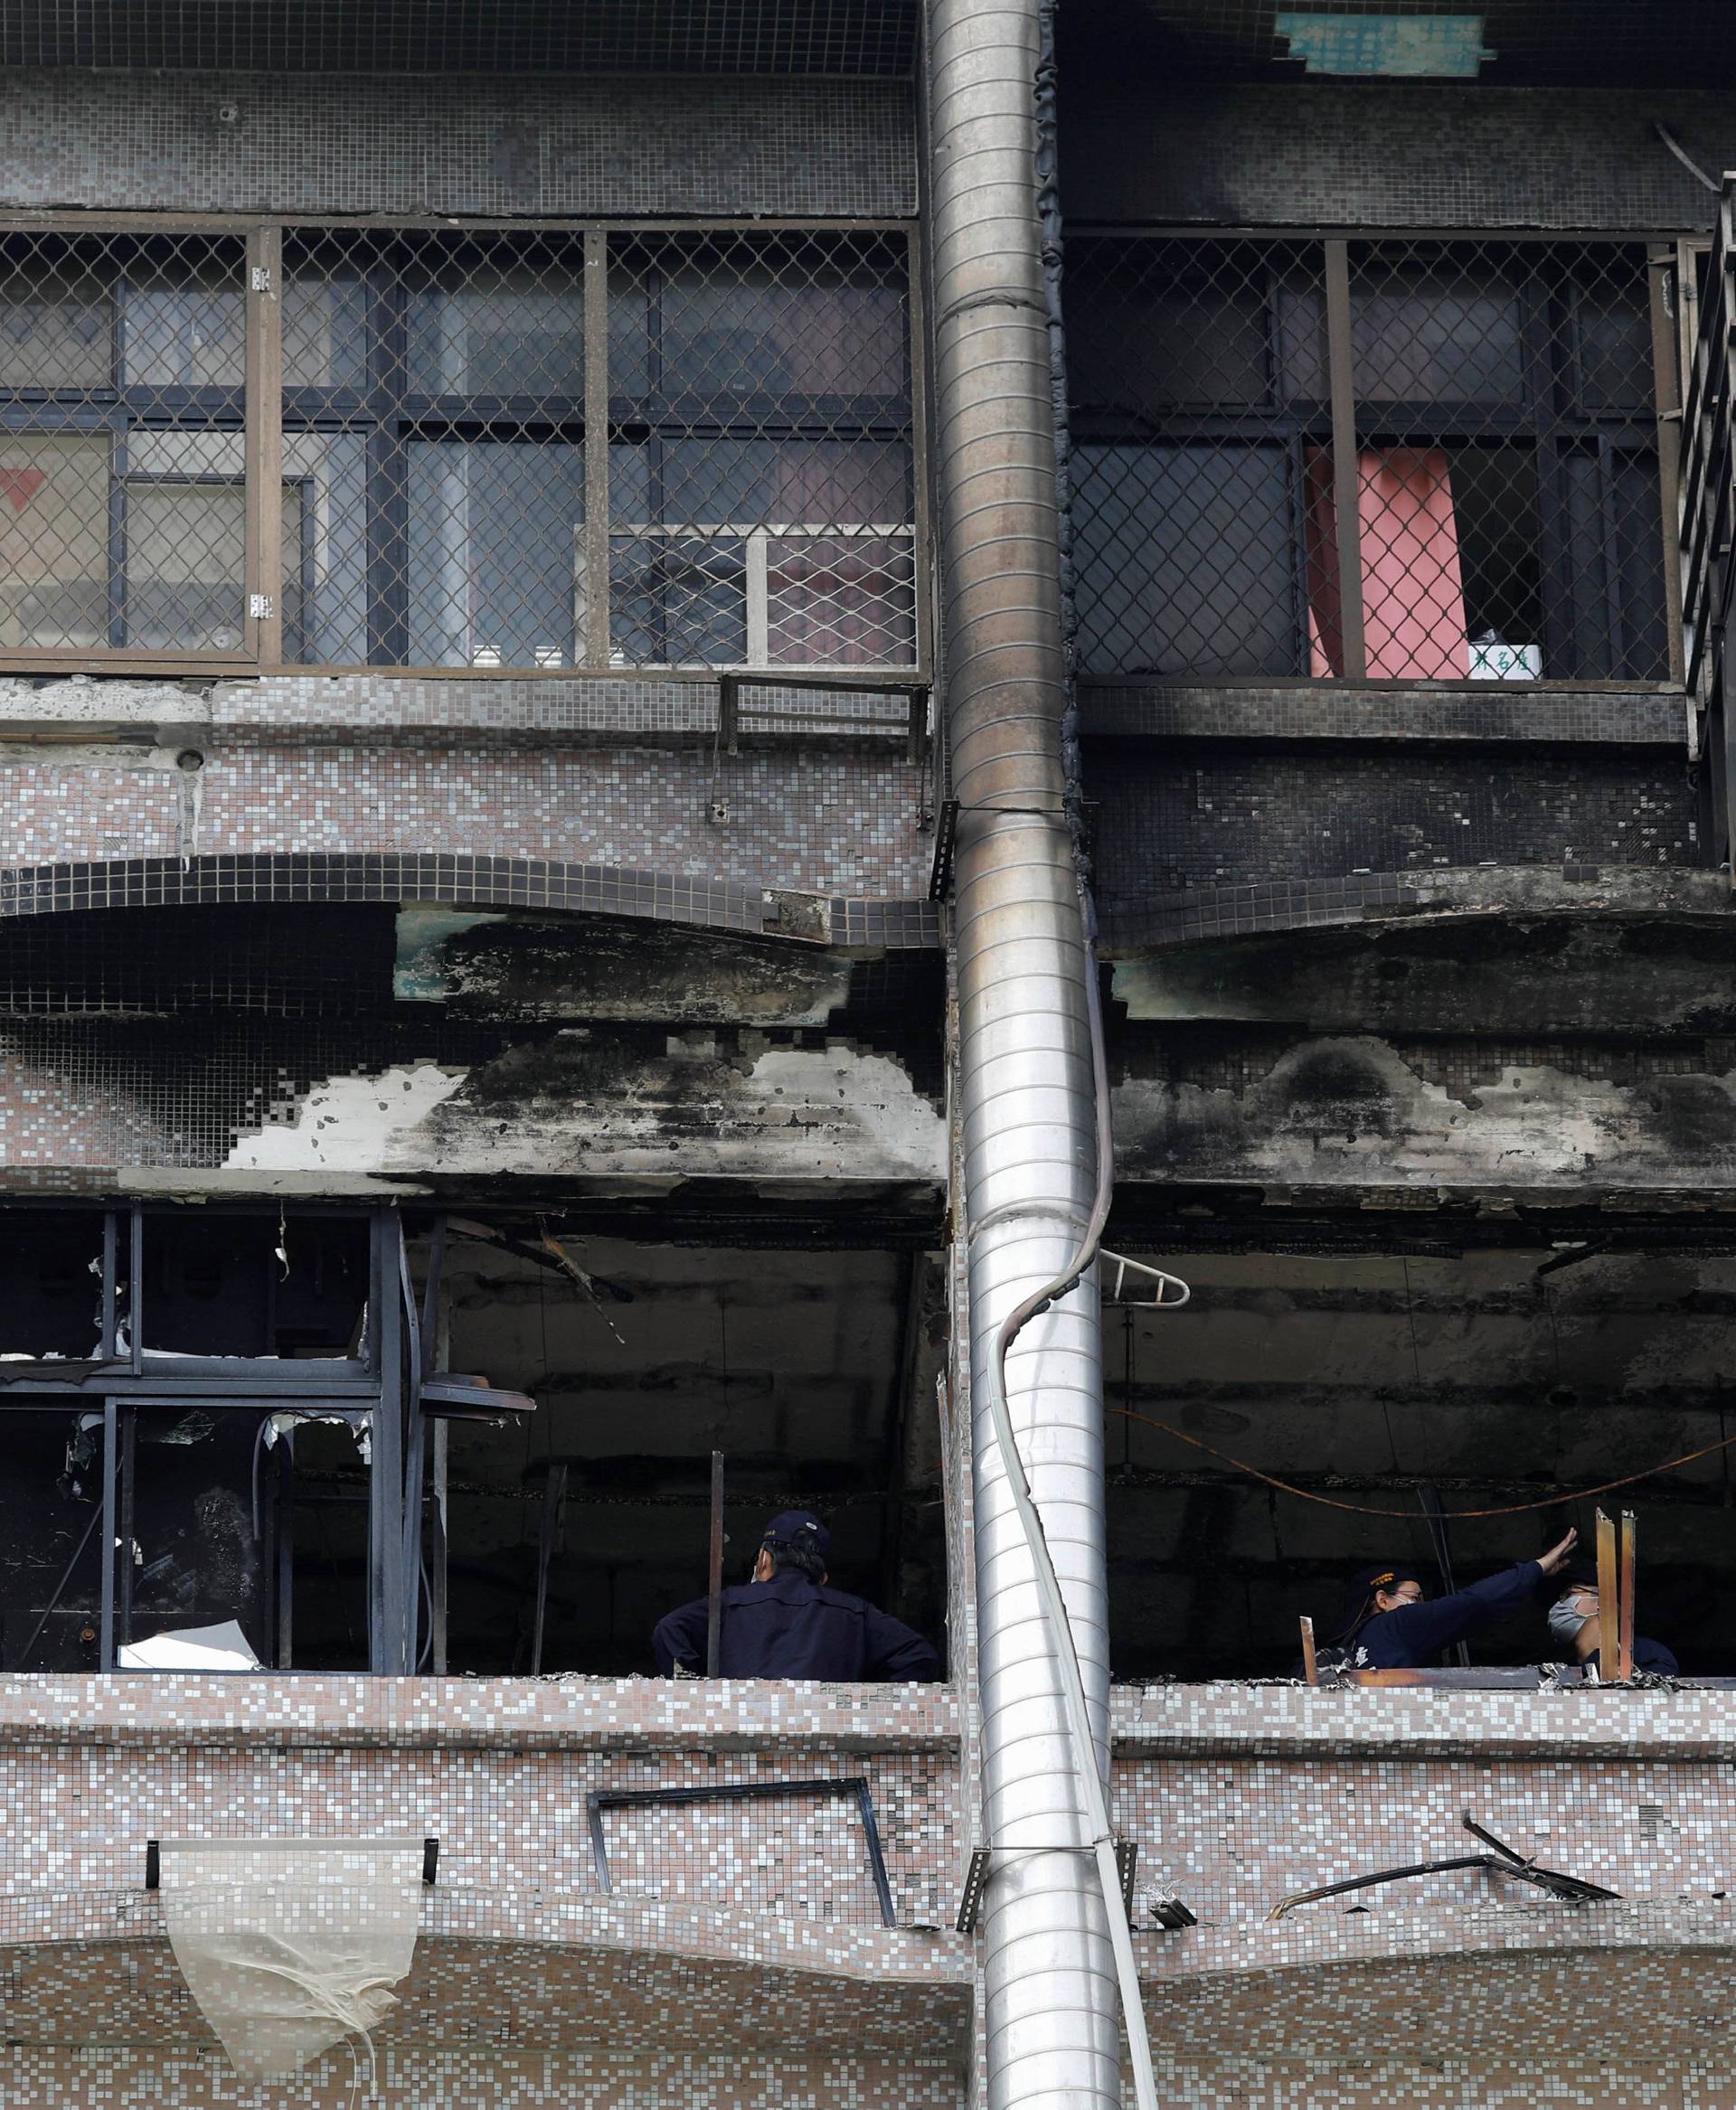 Fire inspectors view damage after a fire broke out at the Taipei Hospital, causing multiple deaths, in New Taipei City